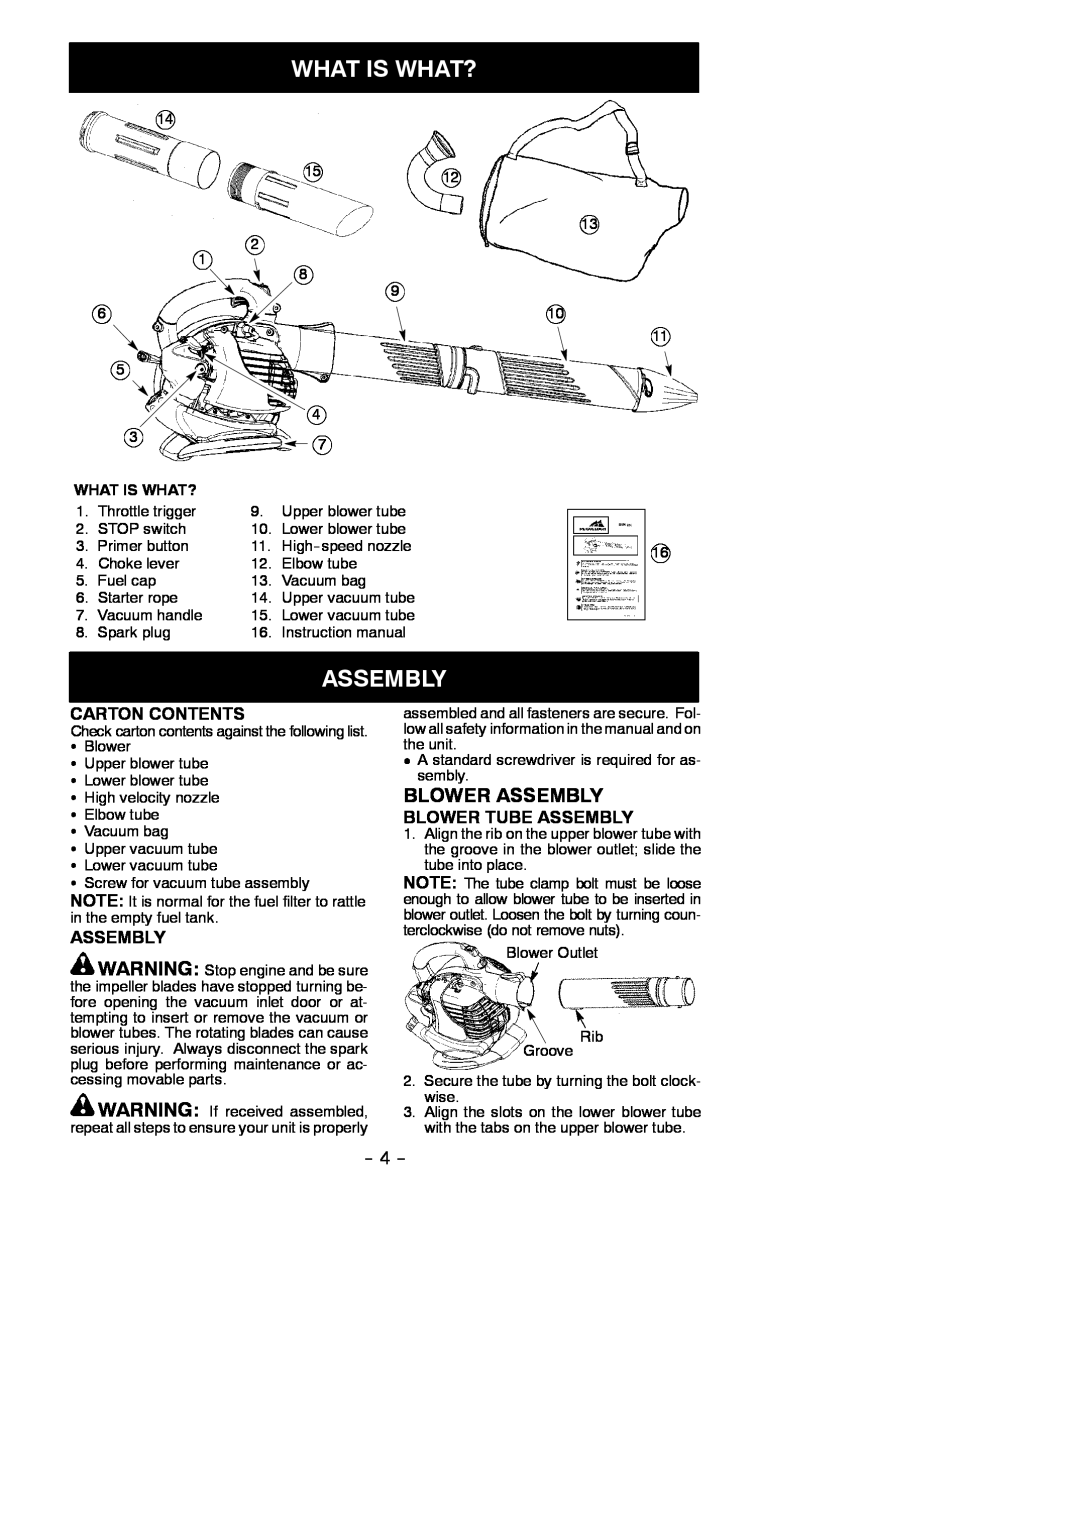 McCulloch MAC GBV 325 instruction manual What Is What?, Blower Assembly, Carton Contents, Blower Tube Assembly 